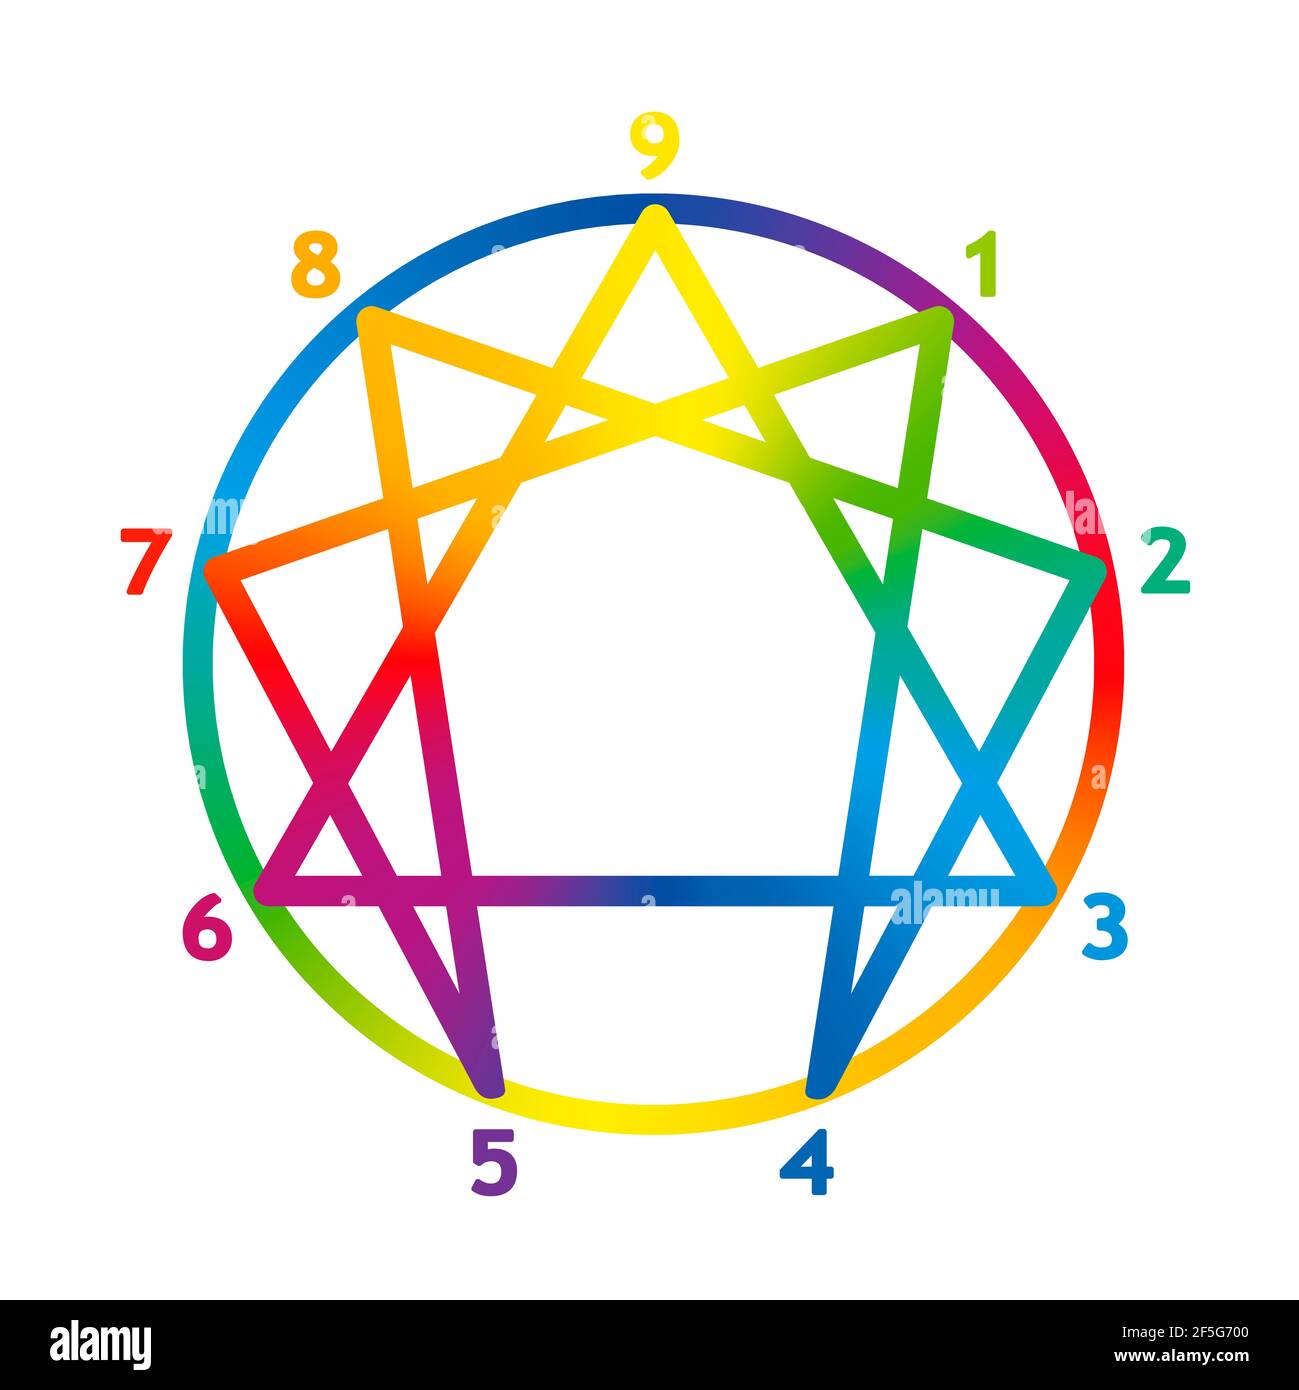 Colorful enneatypes logo, rainbow colored enneagram symbol with numbers from one to nine for the different personality types. Rainbow gradient. Stock Photo